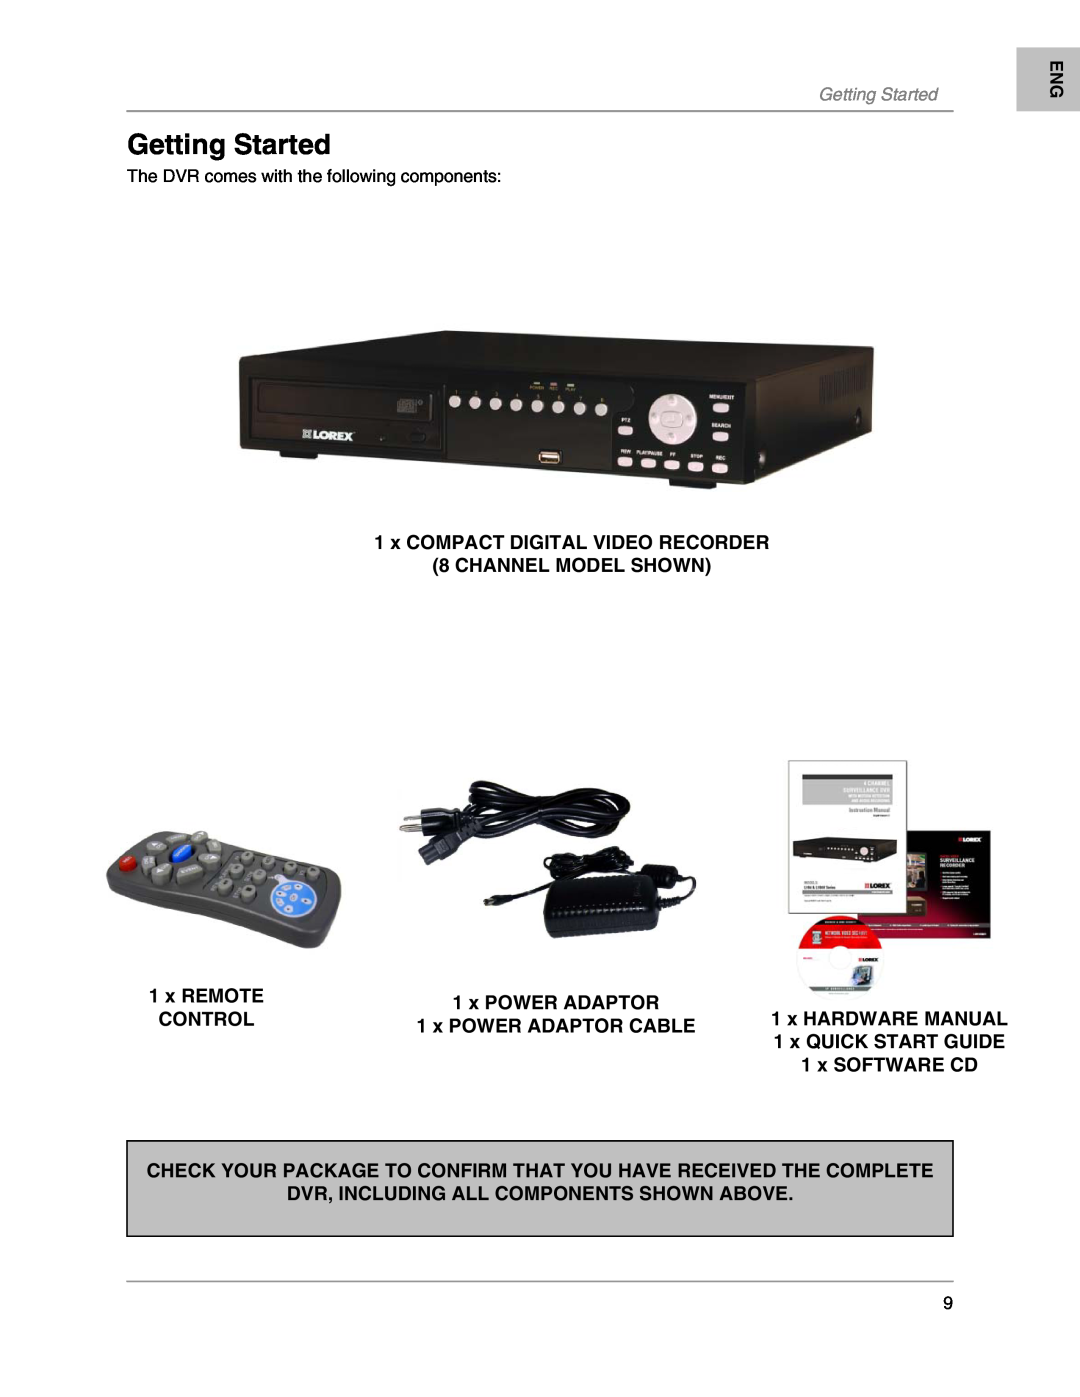 LOREX Technology L204 Getting Started, x COMPACT DIGITAL VIDEO RECORDER 8 CHANNEL MODEL SHOWN, x POWER ADAPTOR, x REMOTE 